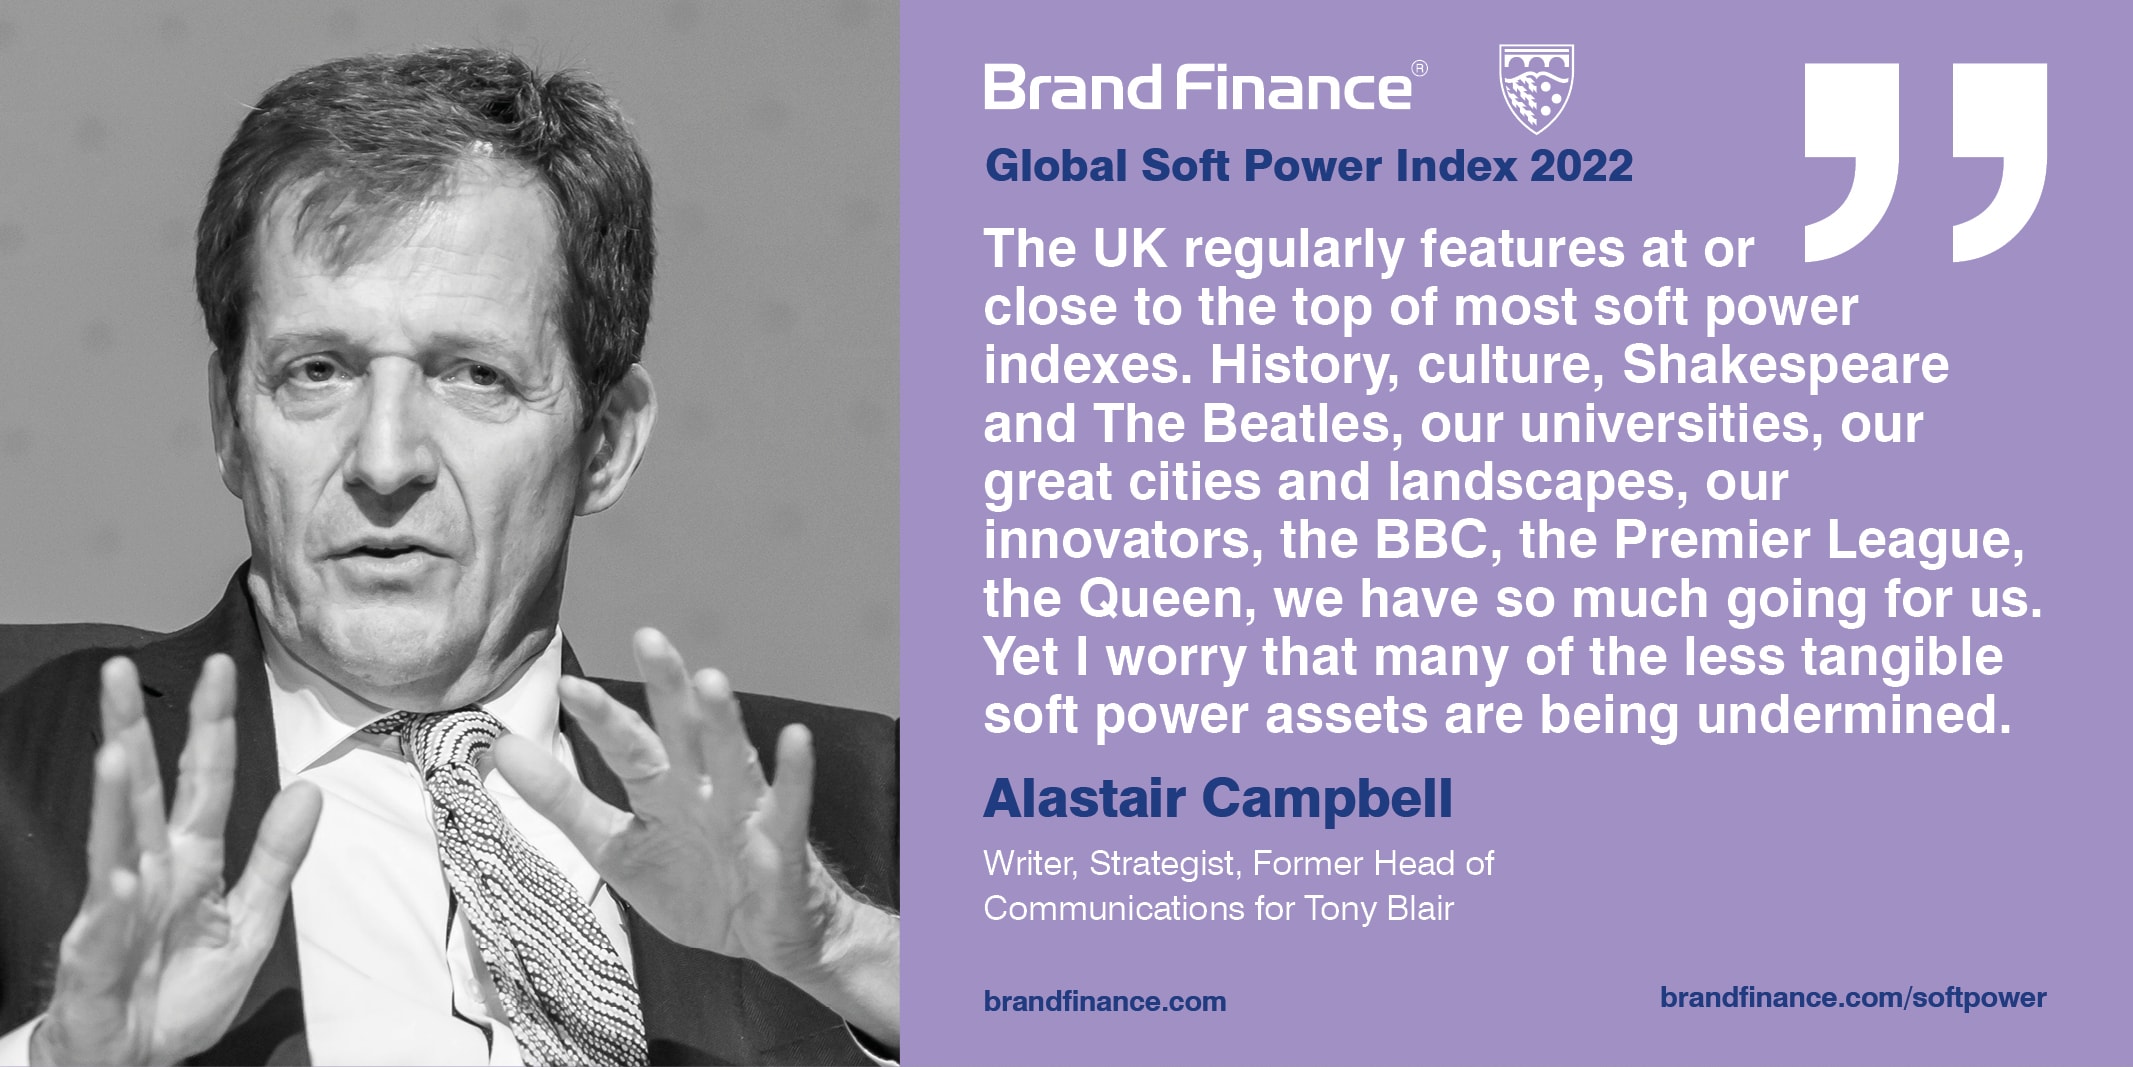 Alastair Campbell, Writer, Strategist, Former Head of Communications for Tony Blair